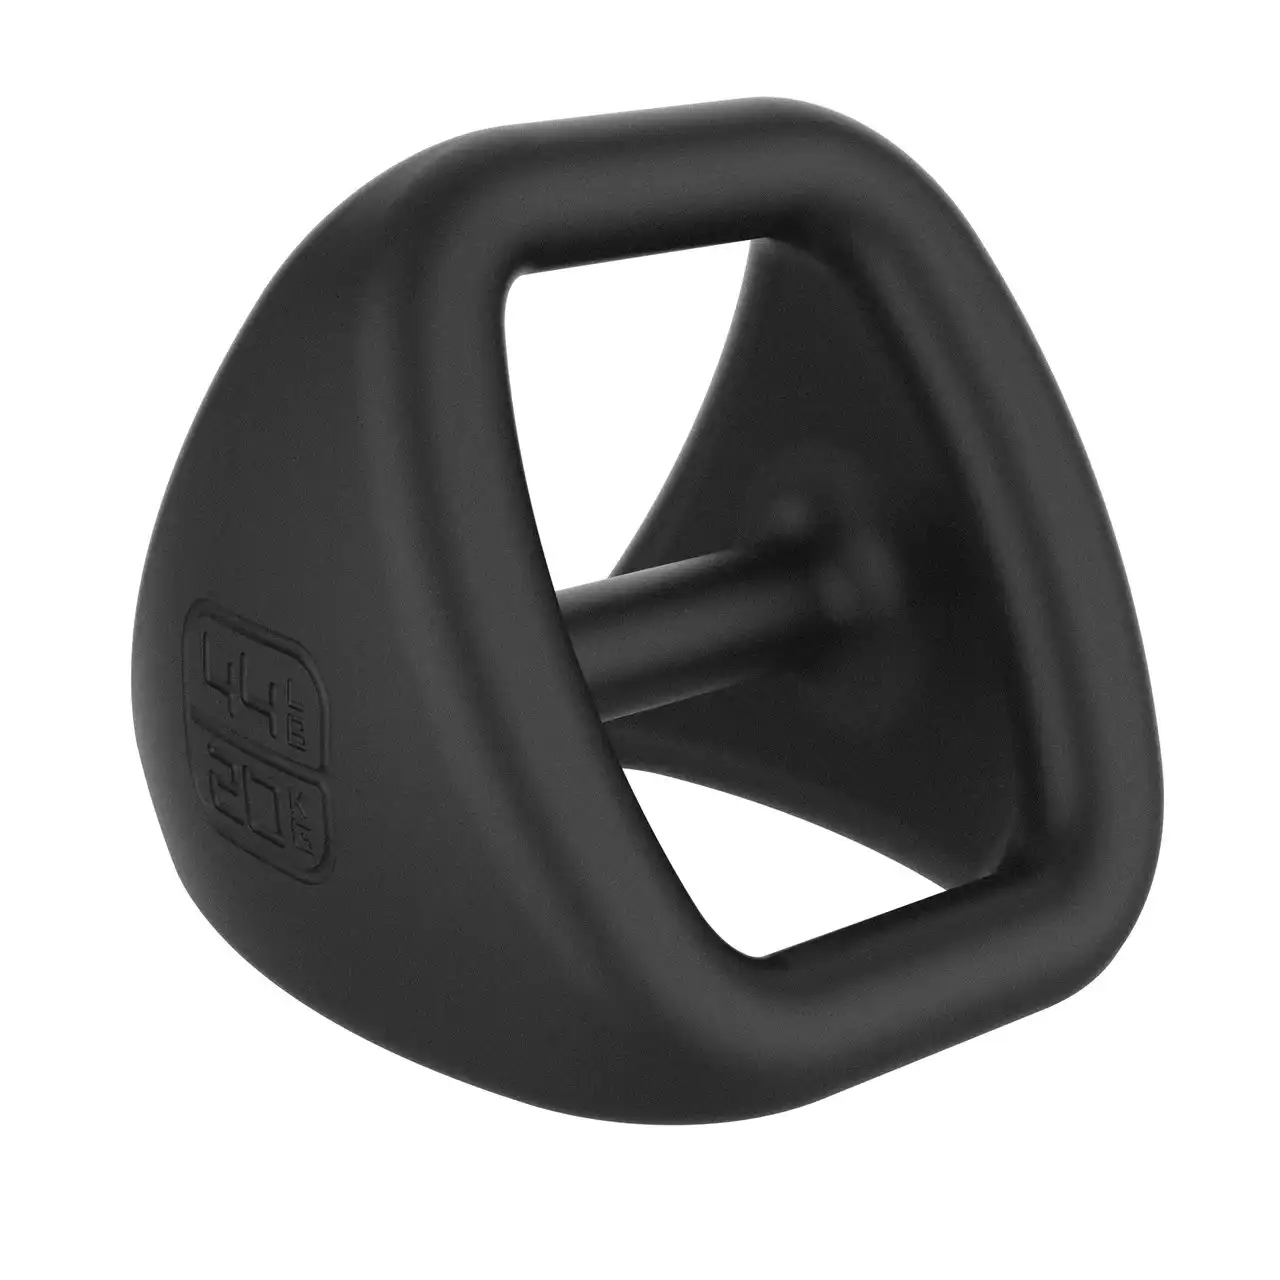 YBell Pro 4-in-1 Kettlebell/Dumbbell/Med Ball/Push Up Stand 20kg Workout Weights